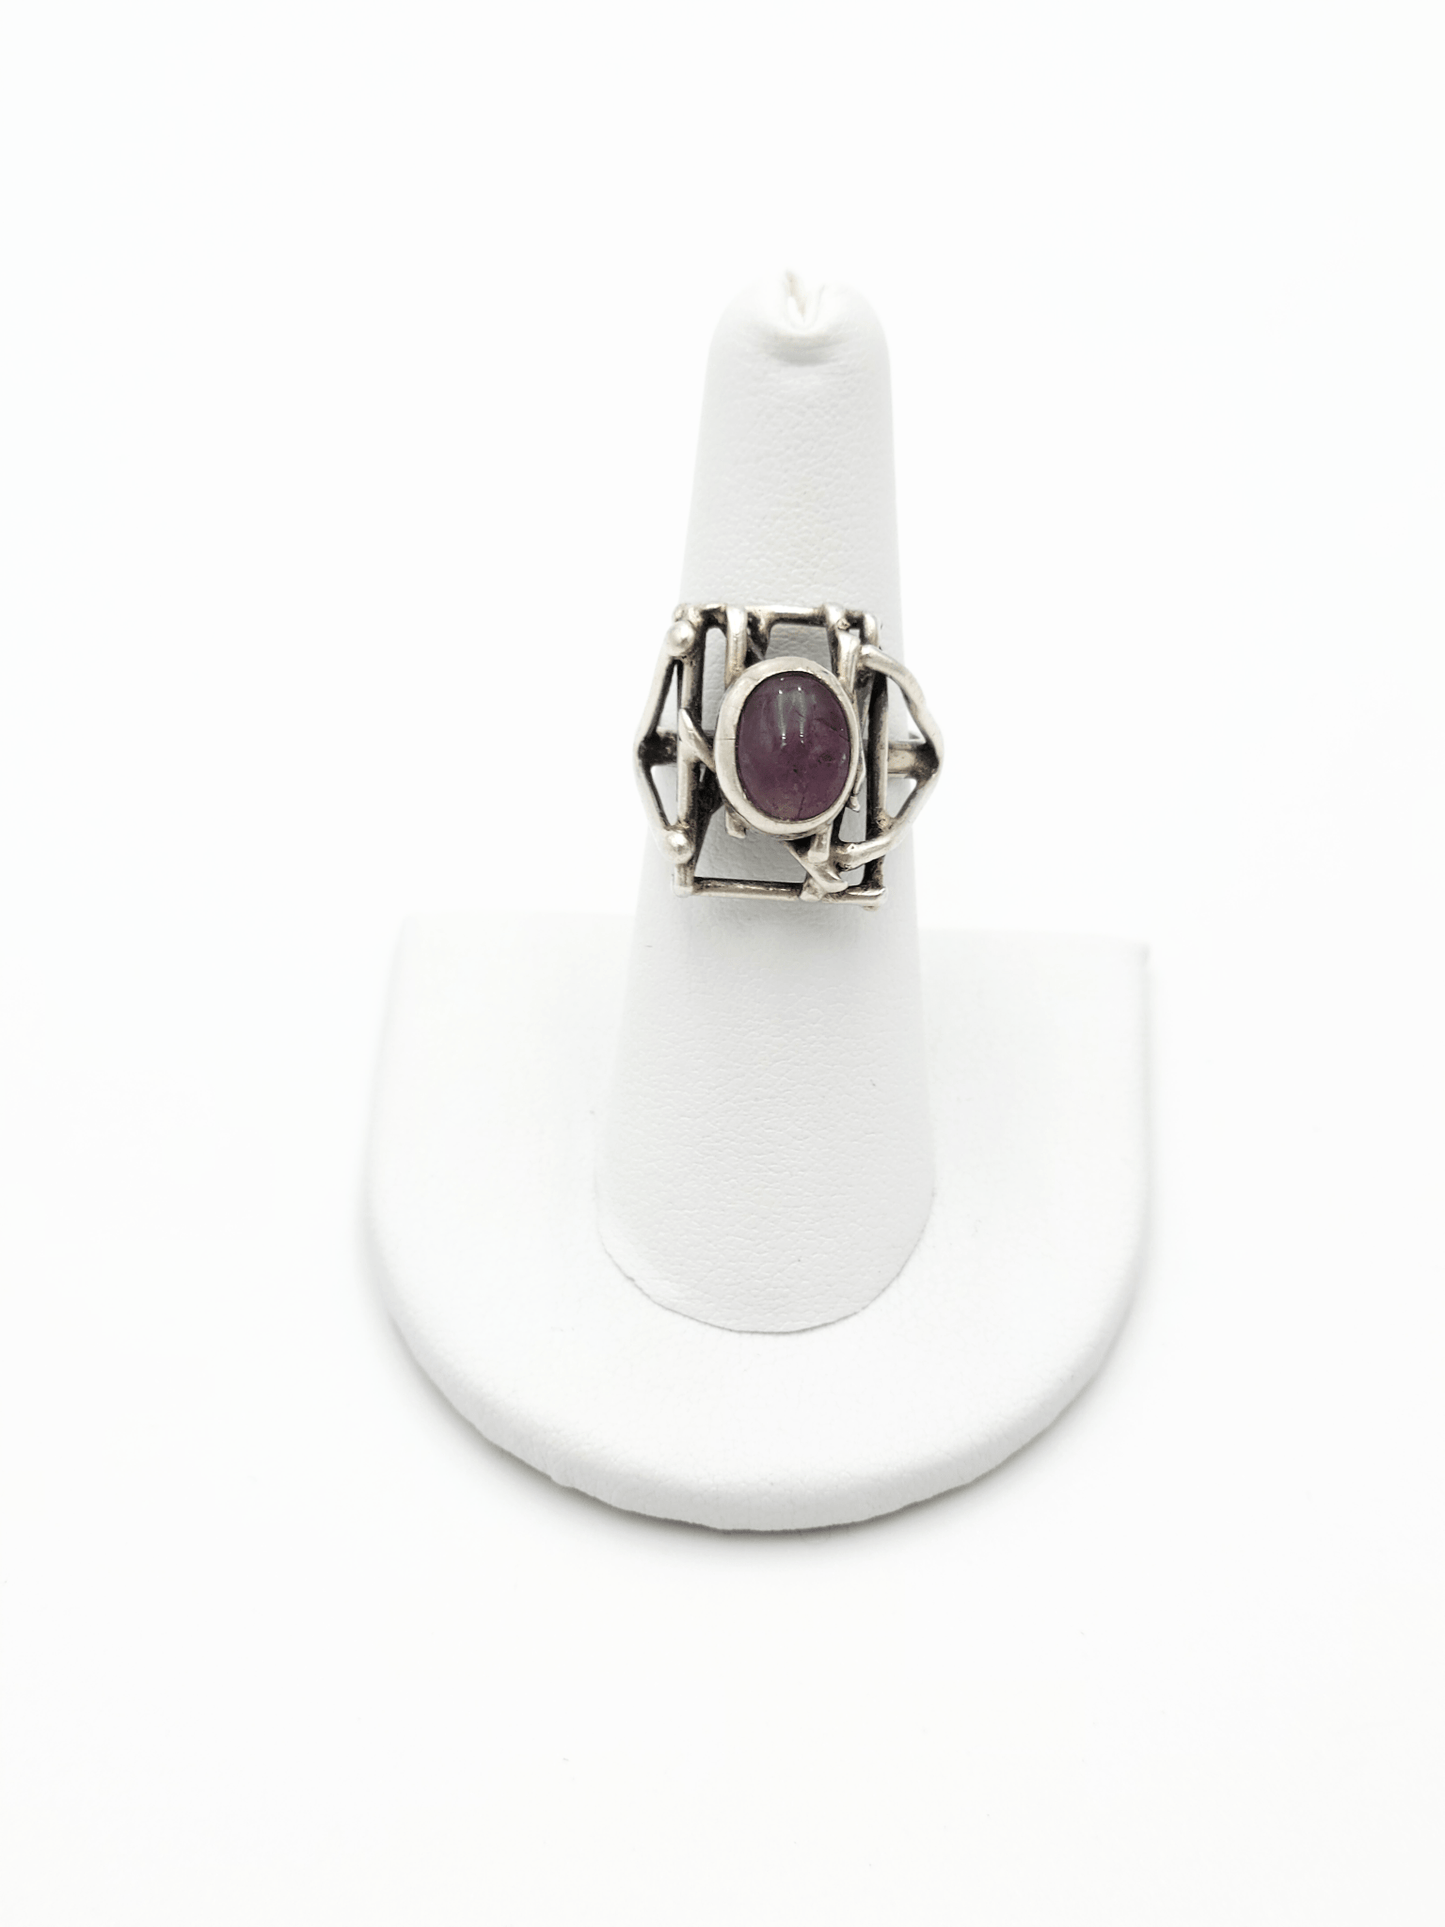 Vintage Sterling Amethyst Ring Jewelry Vintage Artisan Sterling Silver & Amethyst Abstract Modernist Openwork Ring